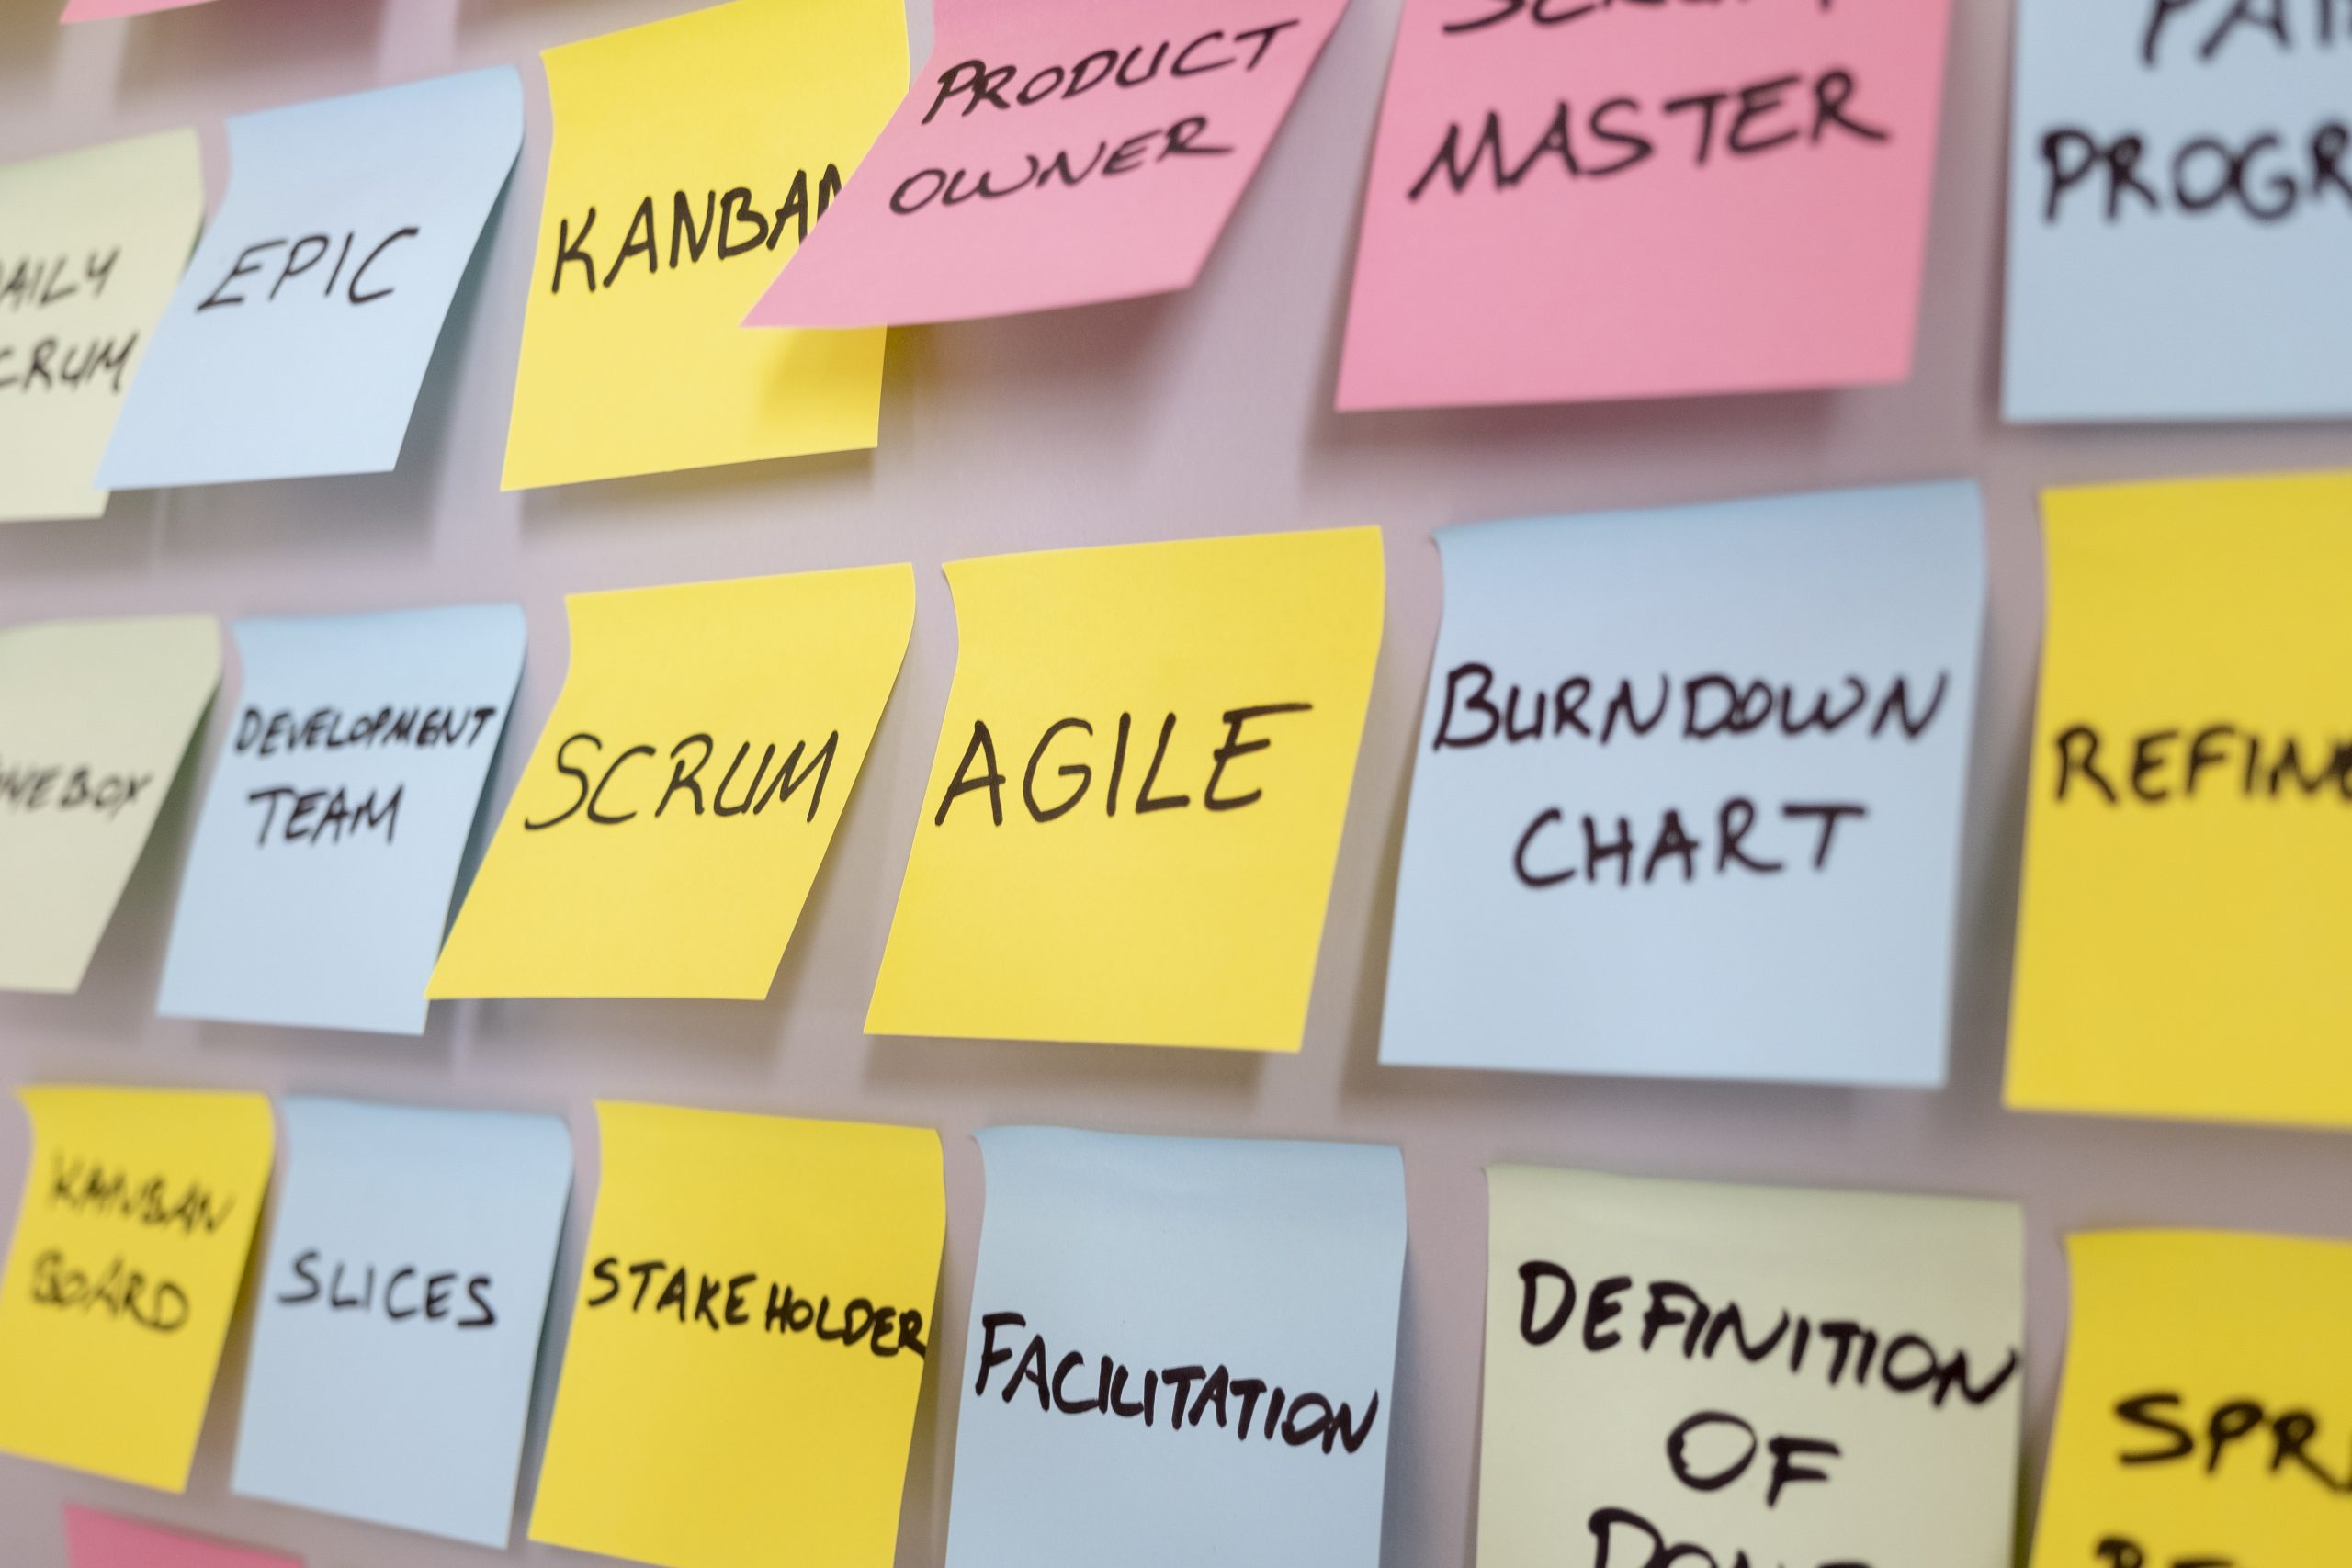 The Fundamentals of Agile: A Beginner’s Guide